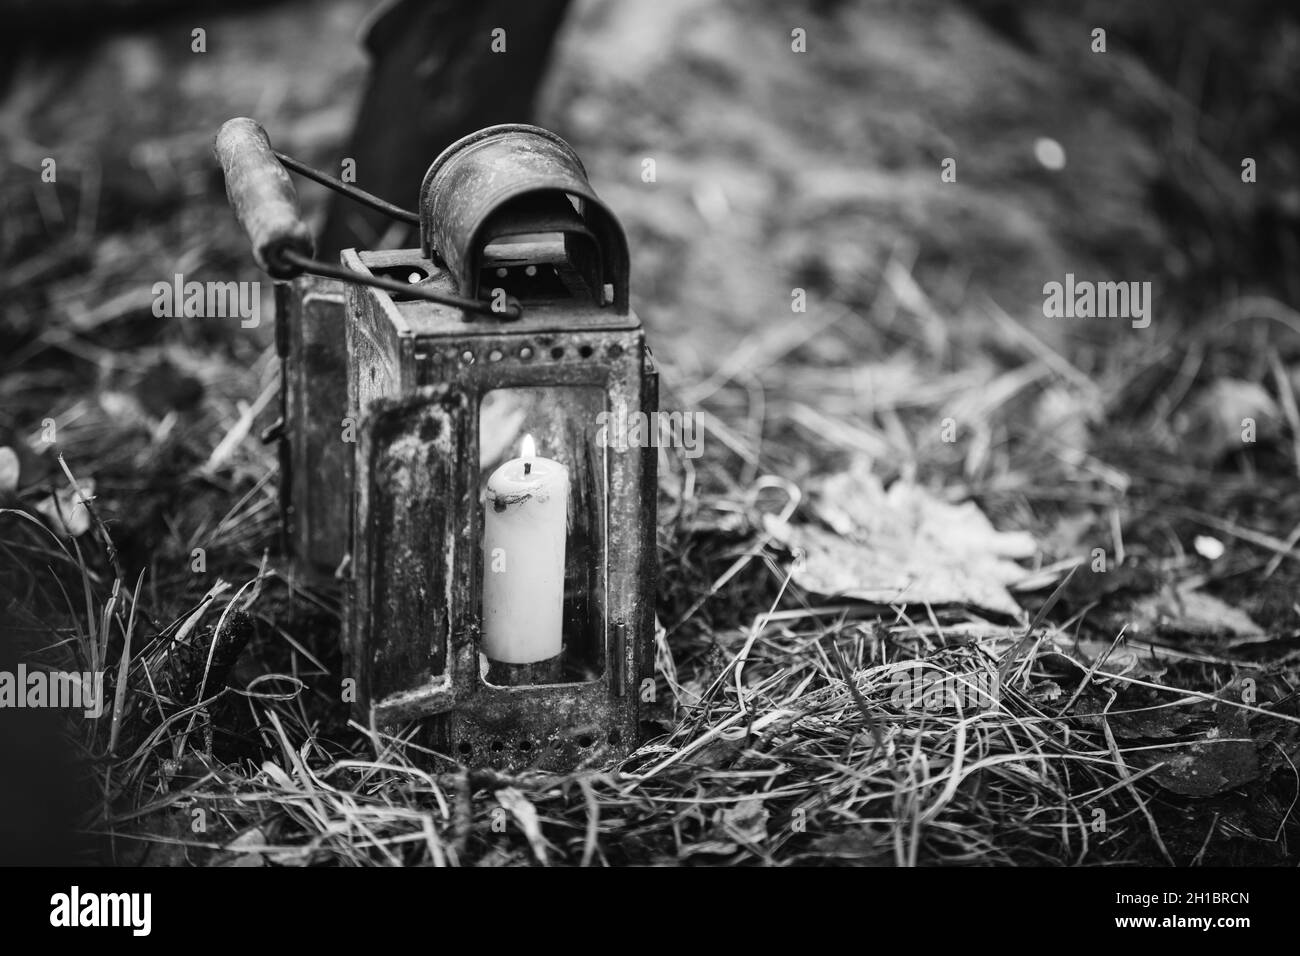 Old Vintage Lantern With Burning Candle On Forest Ground Stock Photo